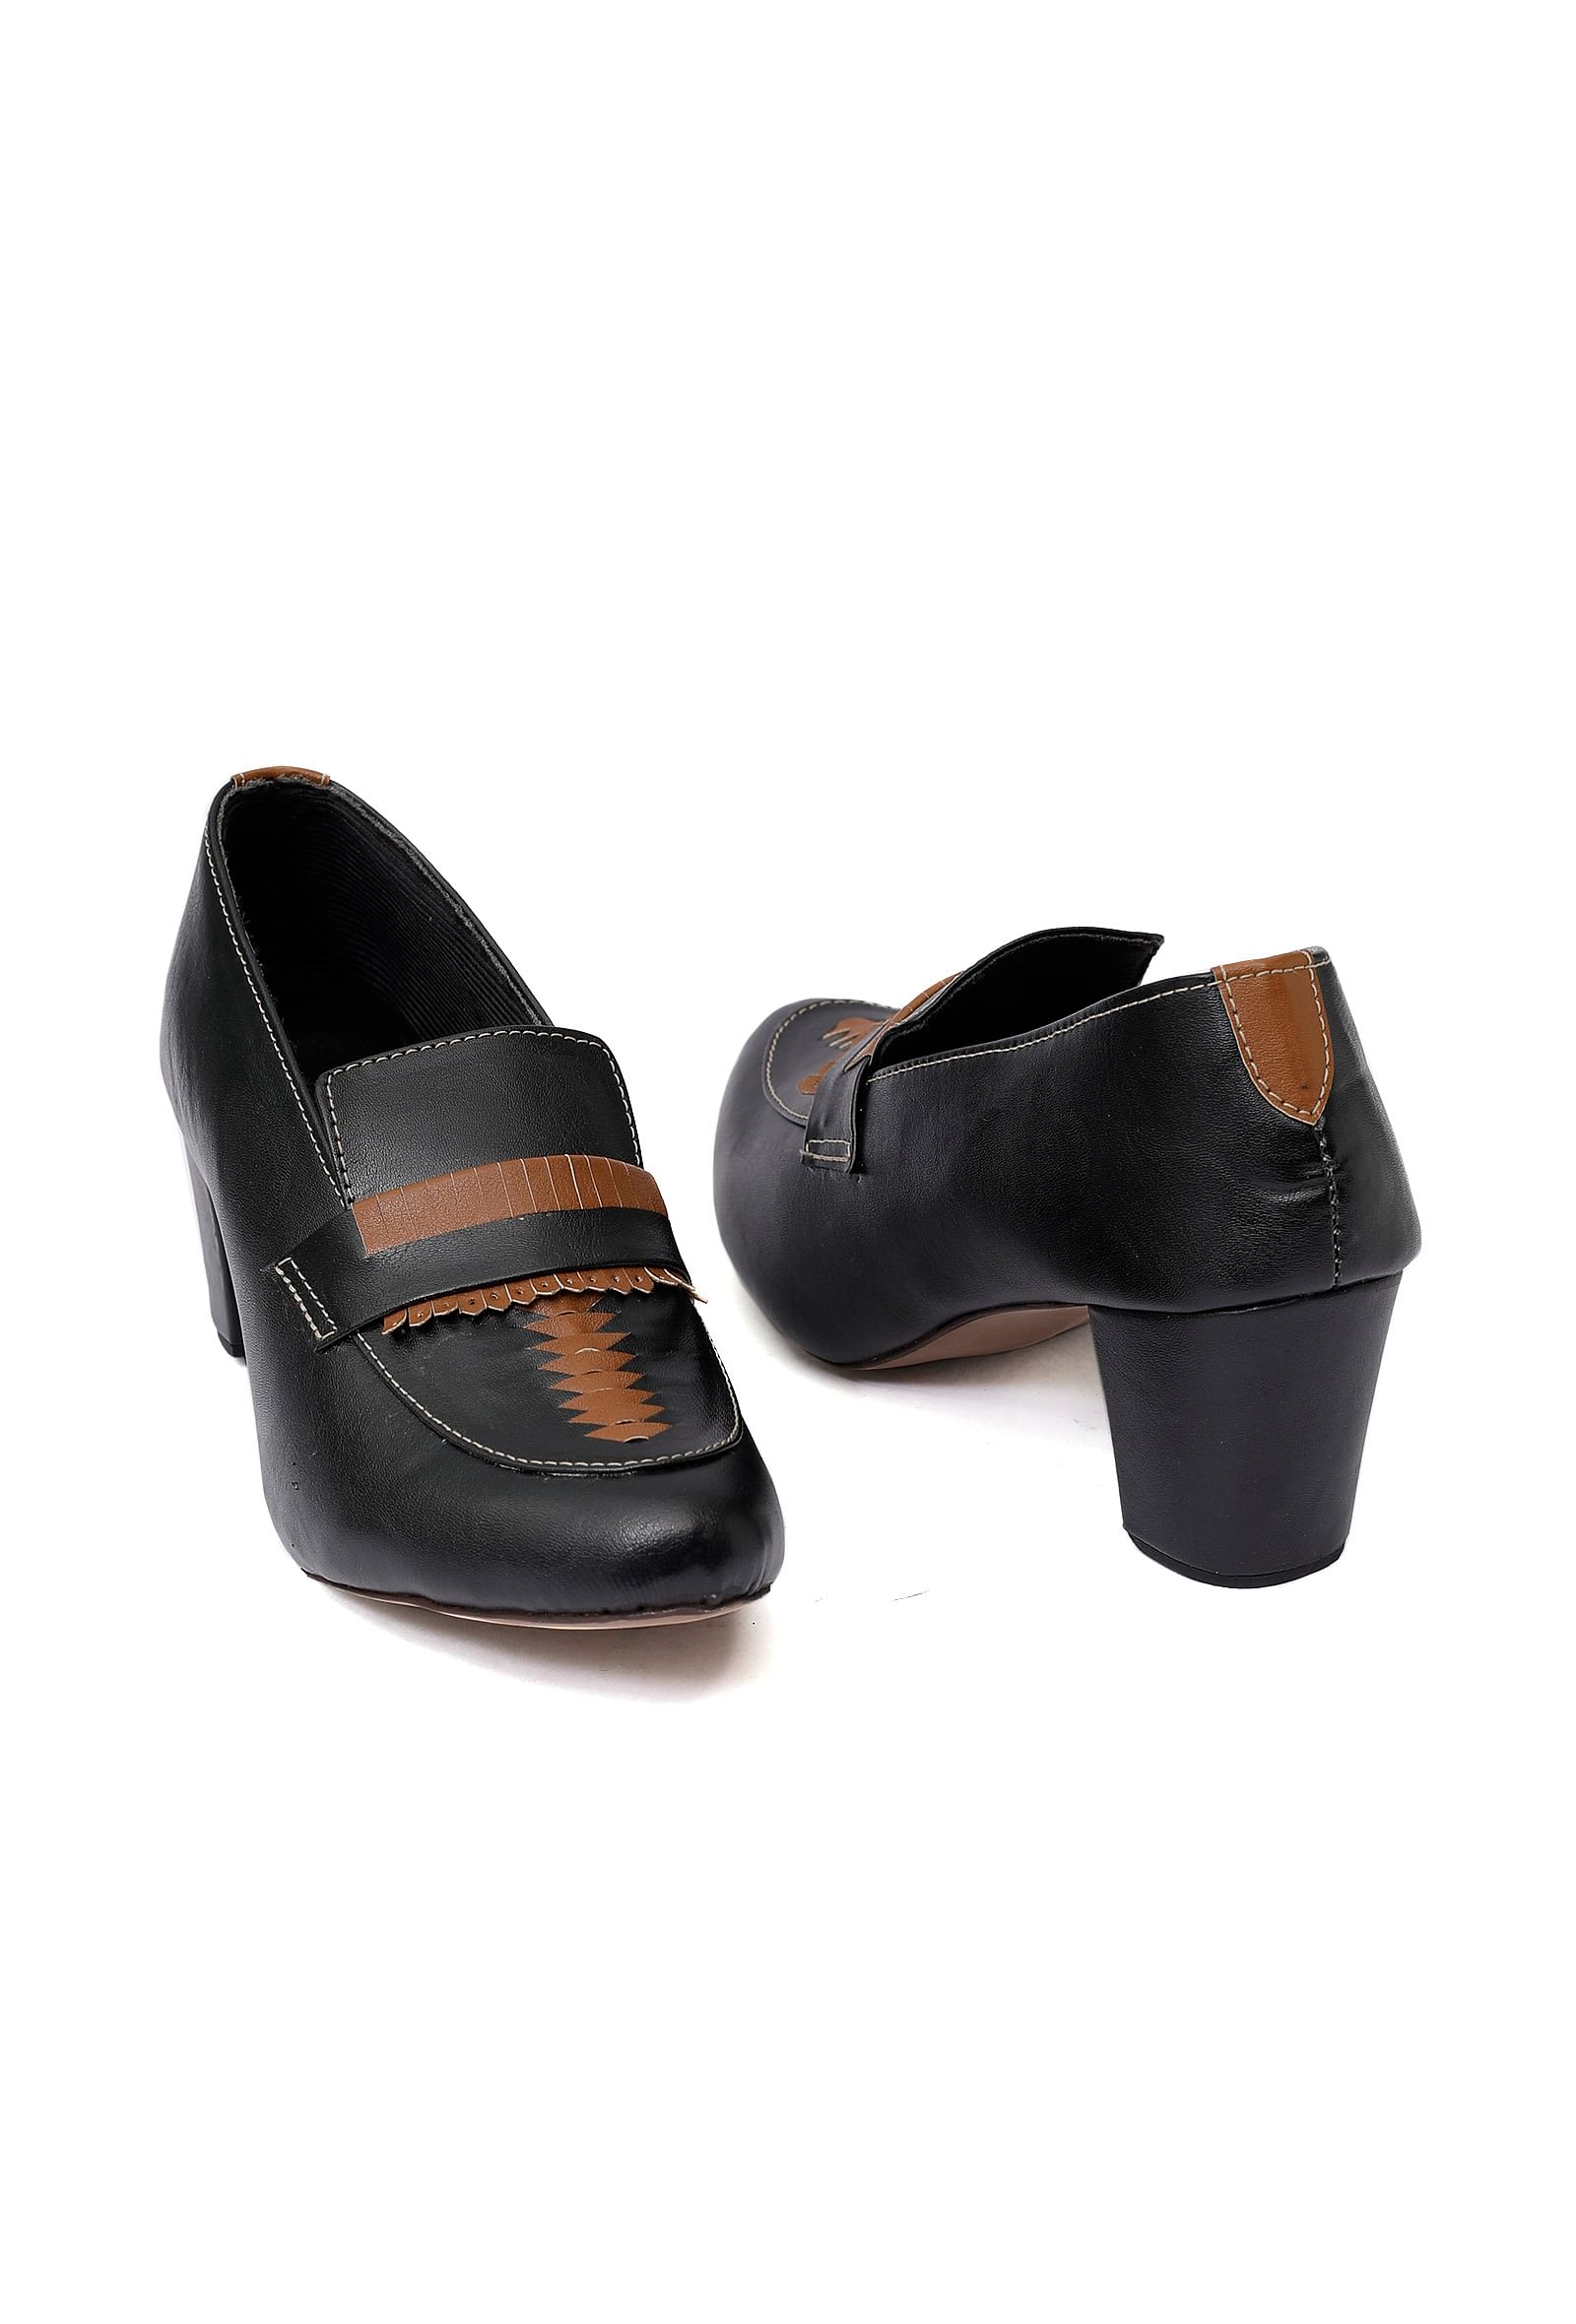 Black Cruelty-Free Leather Loafer Heels